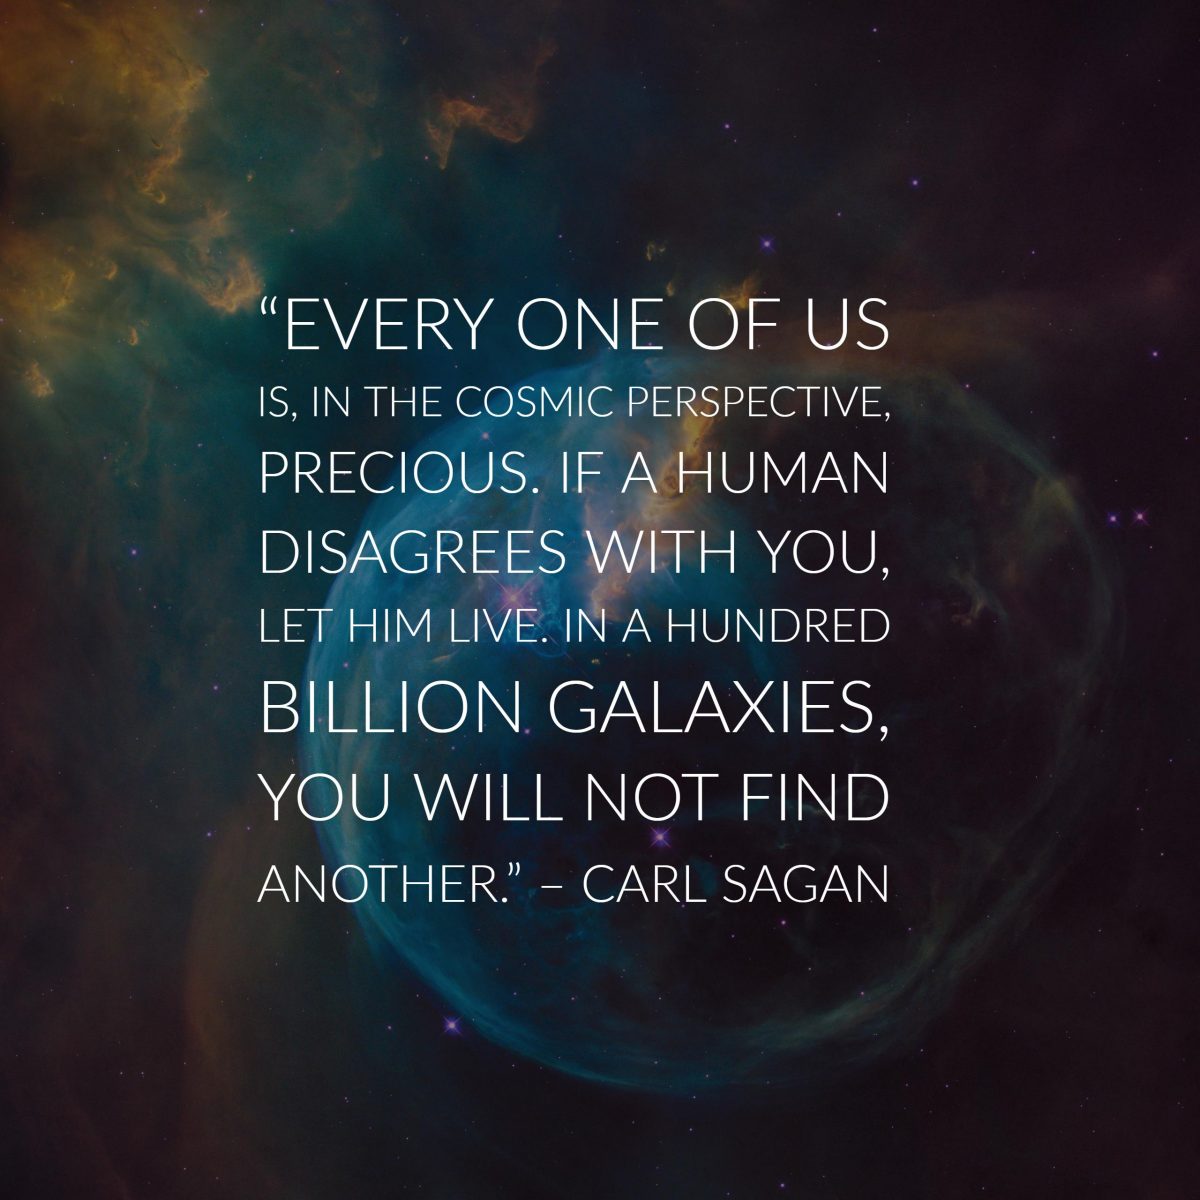 30 Precious Carl Sagan Image Quotes about the Cosmos | Inspirationfeed